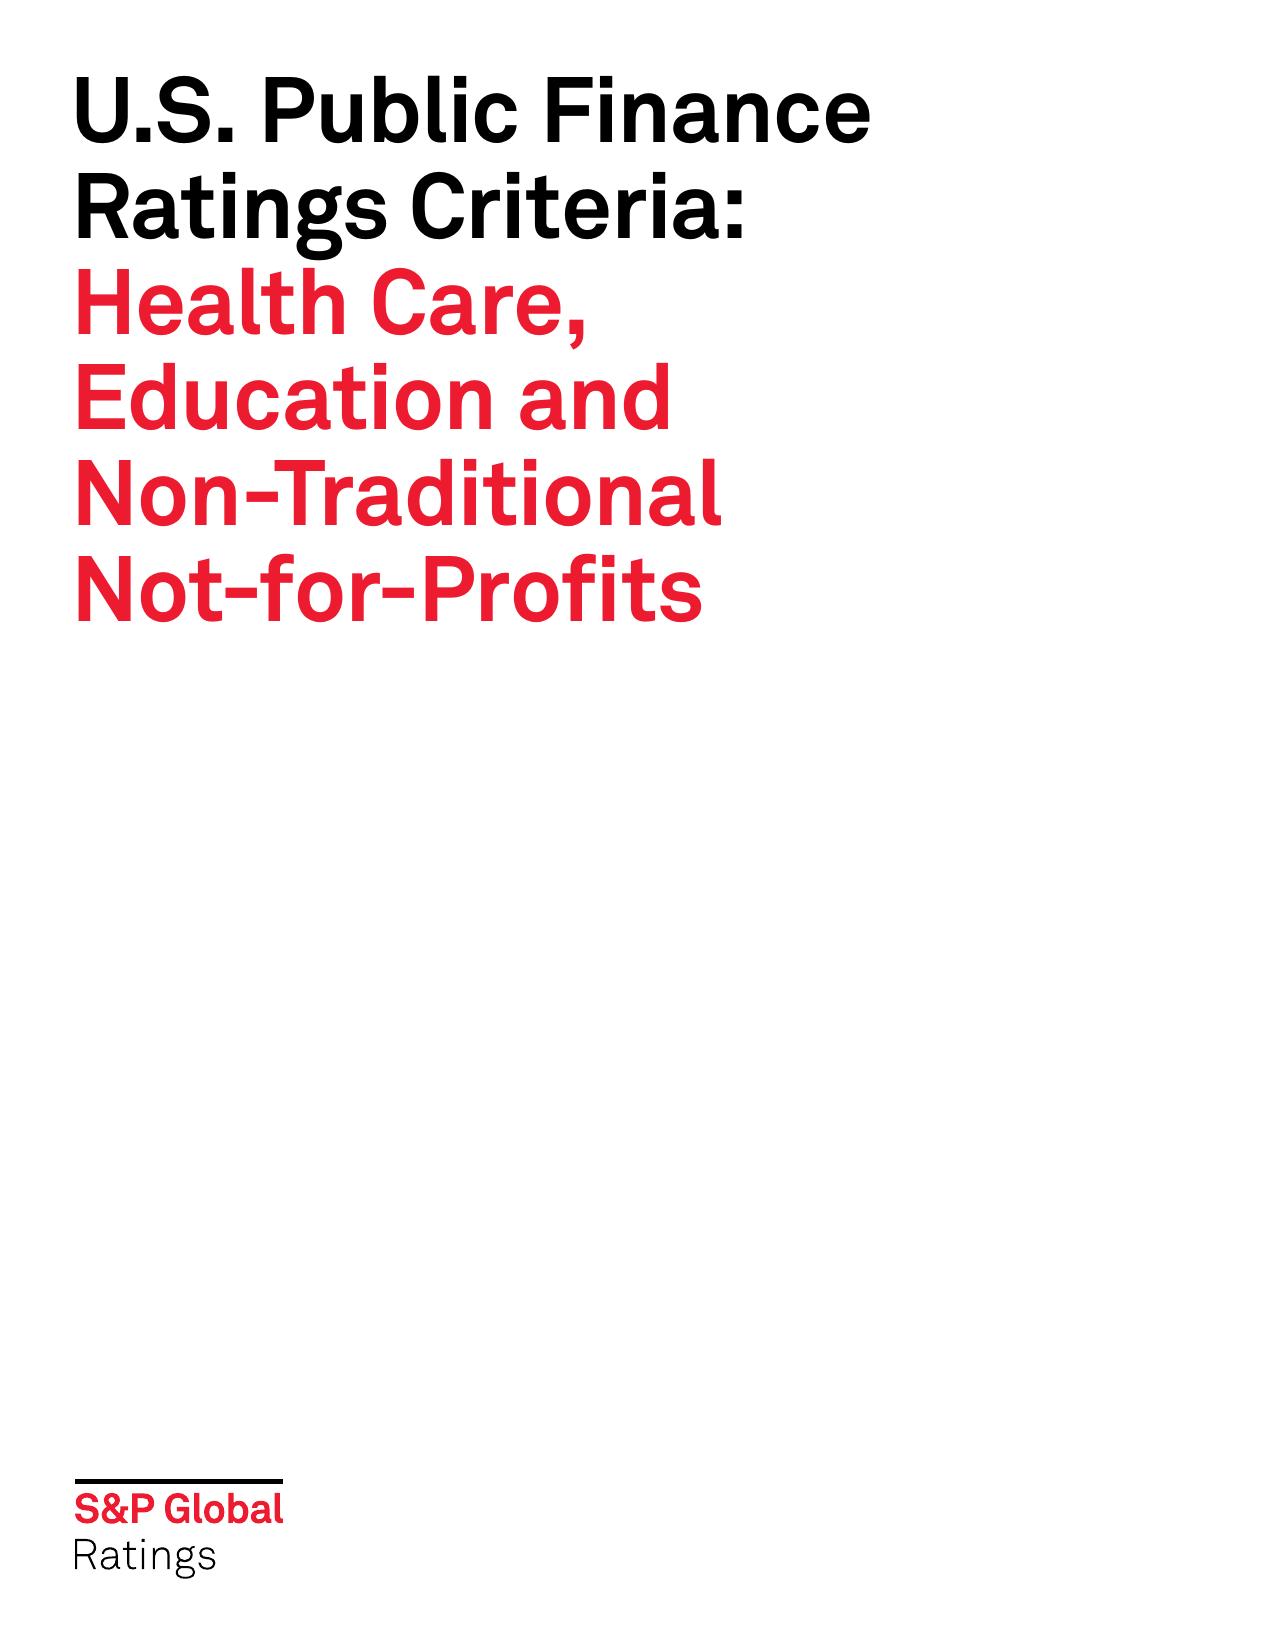 US Public Finance Ratings Criteria Health Care, Education and Non-Traditional Not-for-Profits 2016